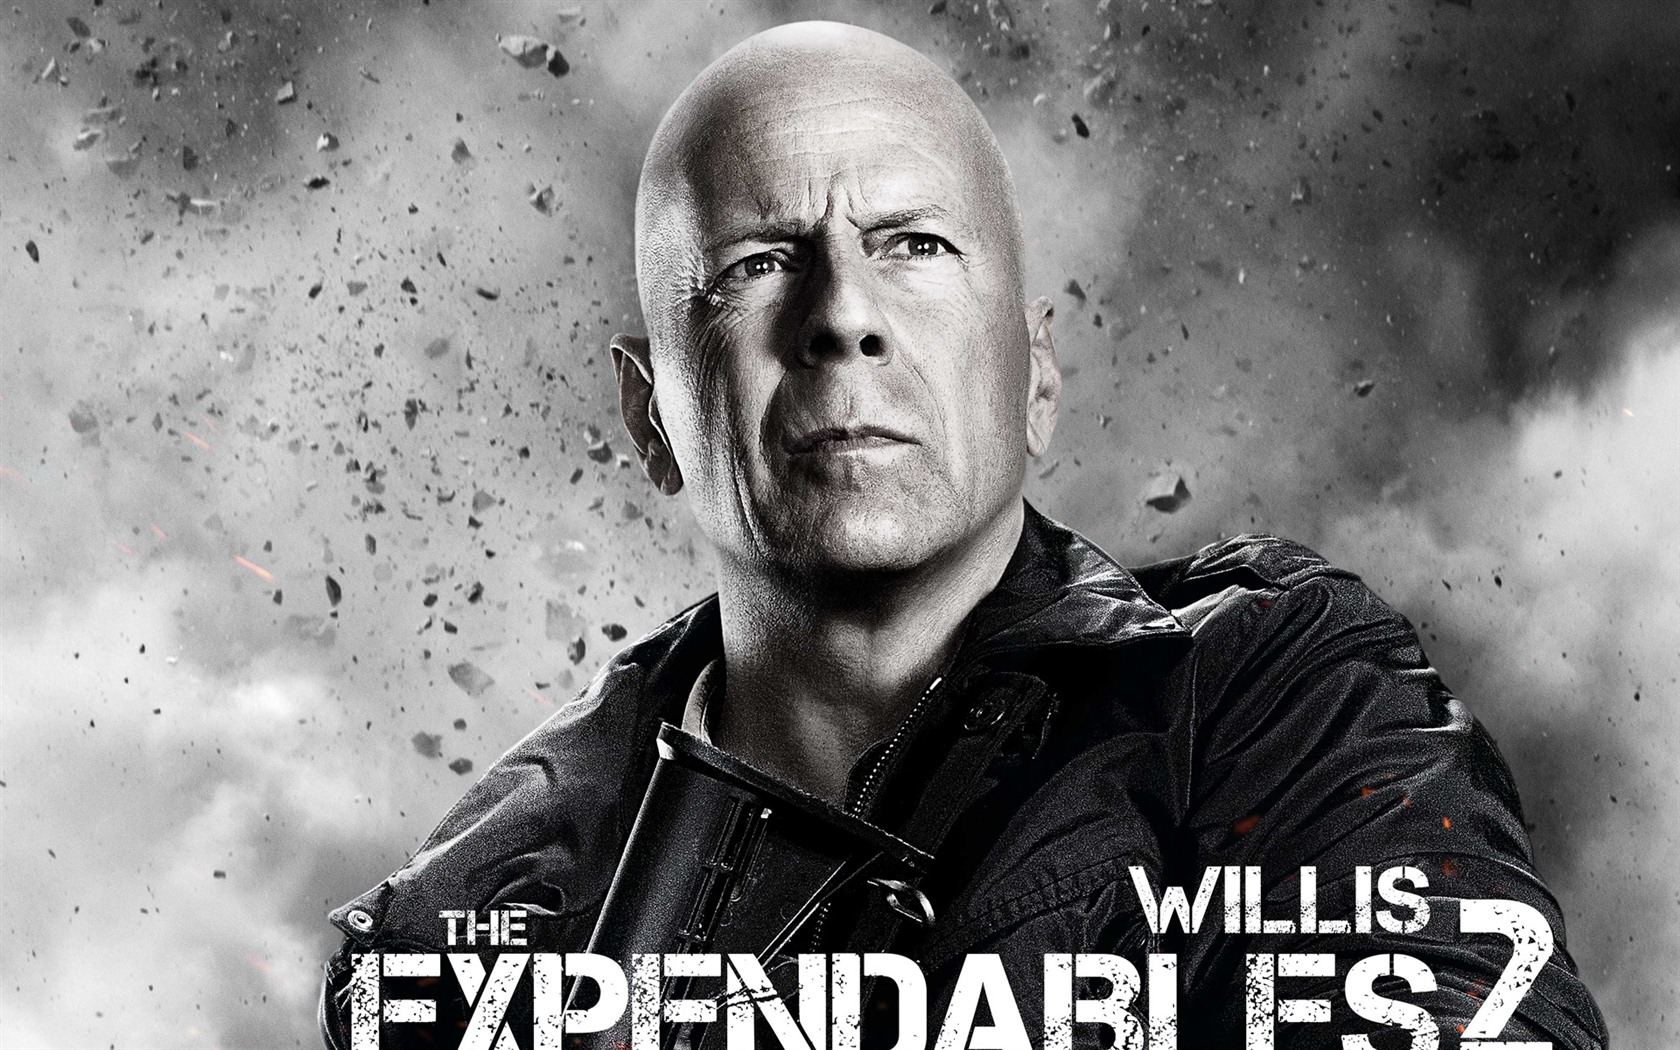 2012 Expendables2 HDの壁紙 #12 - 1680x1050